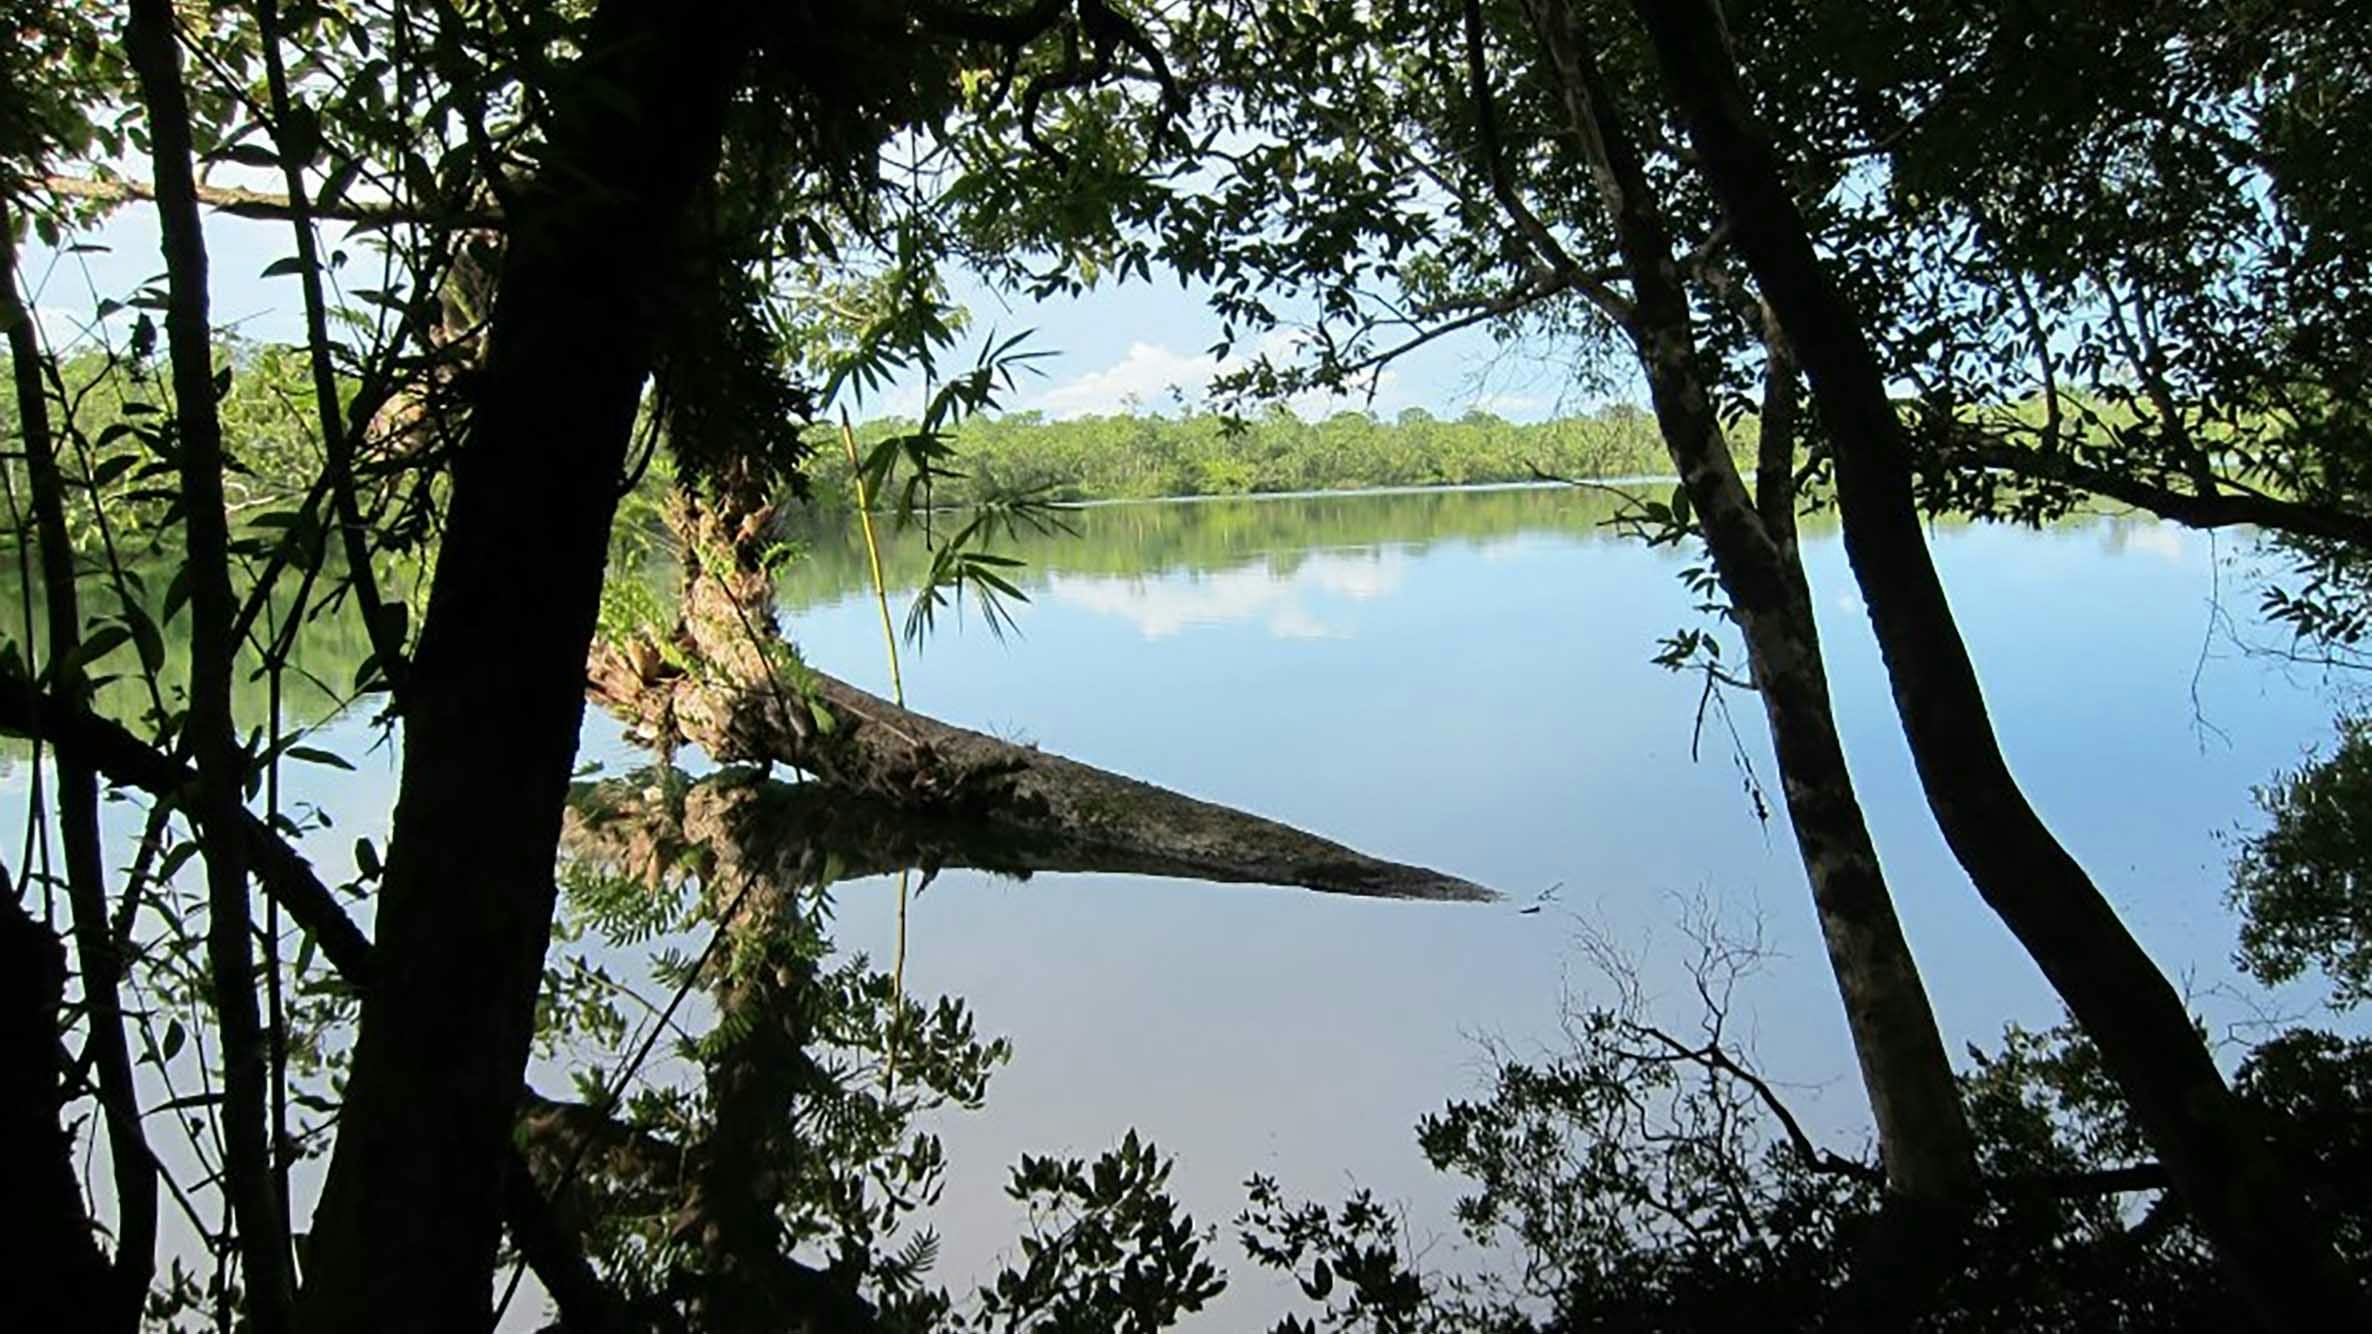 lake is in view between trees which frame the picture. There is blue sky in the background